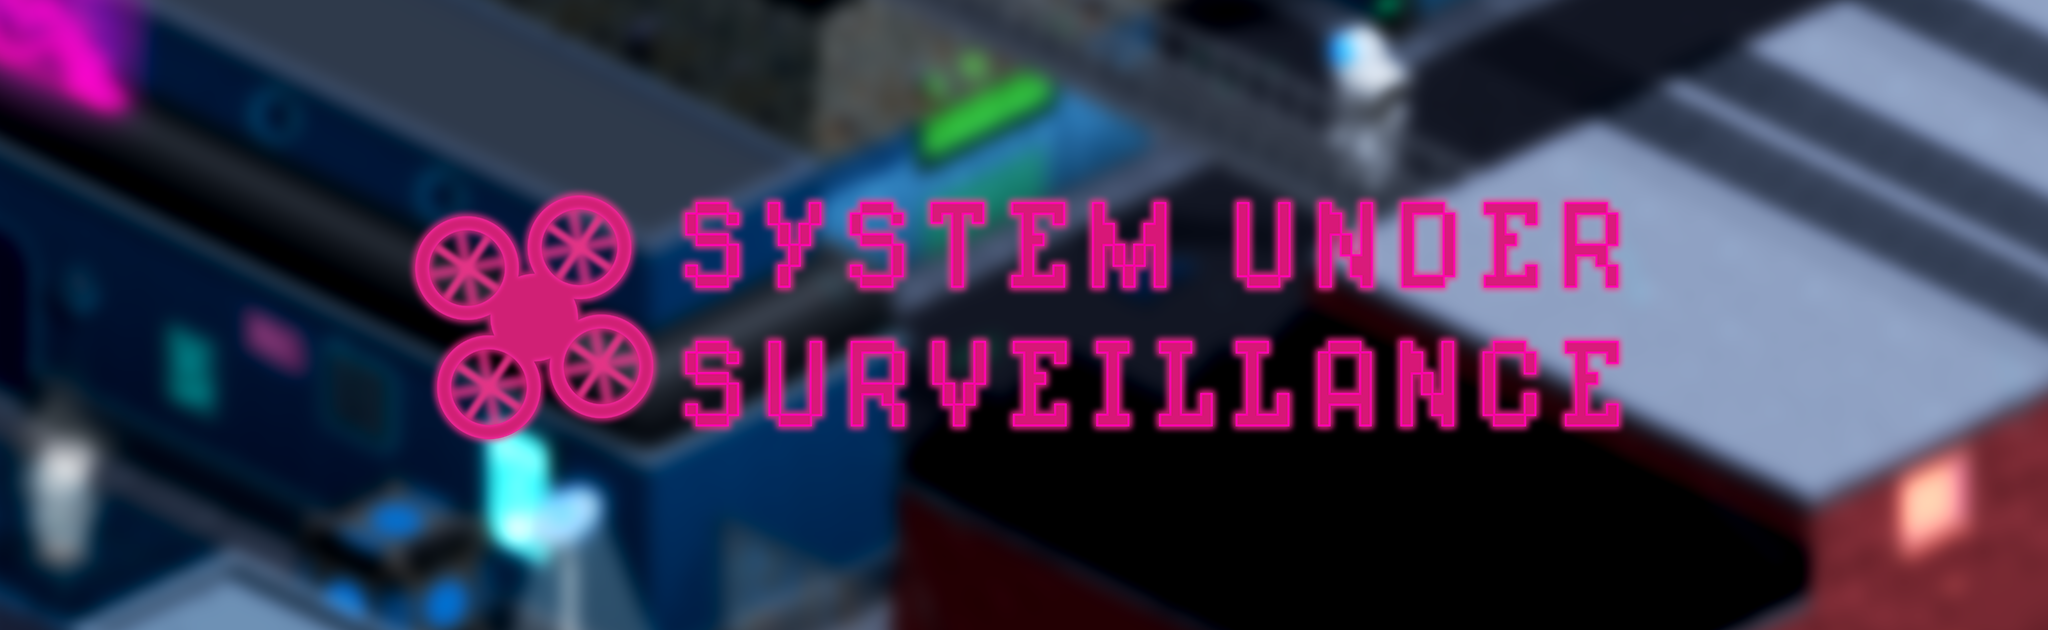 Logo and title screen of System Under Surveillance